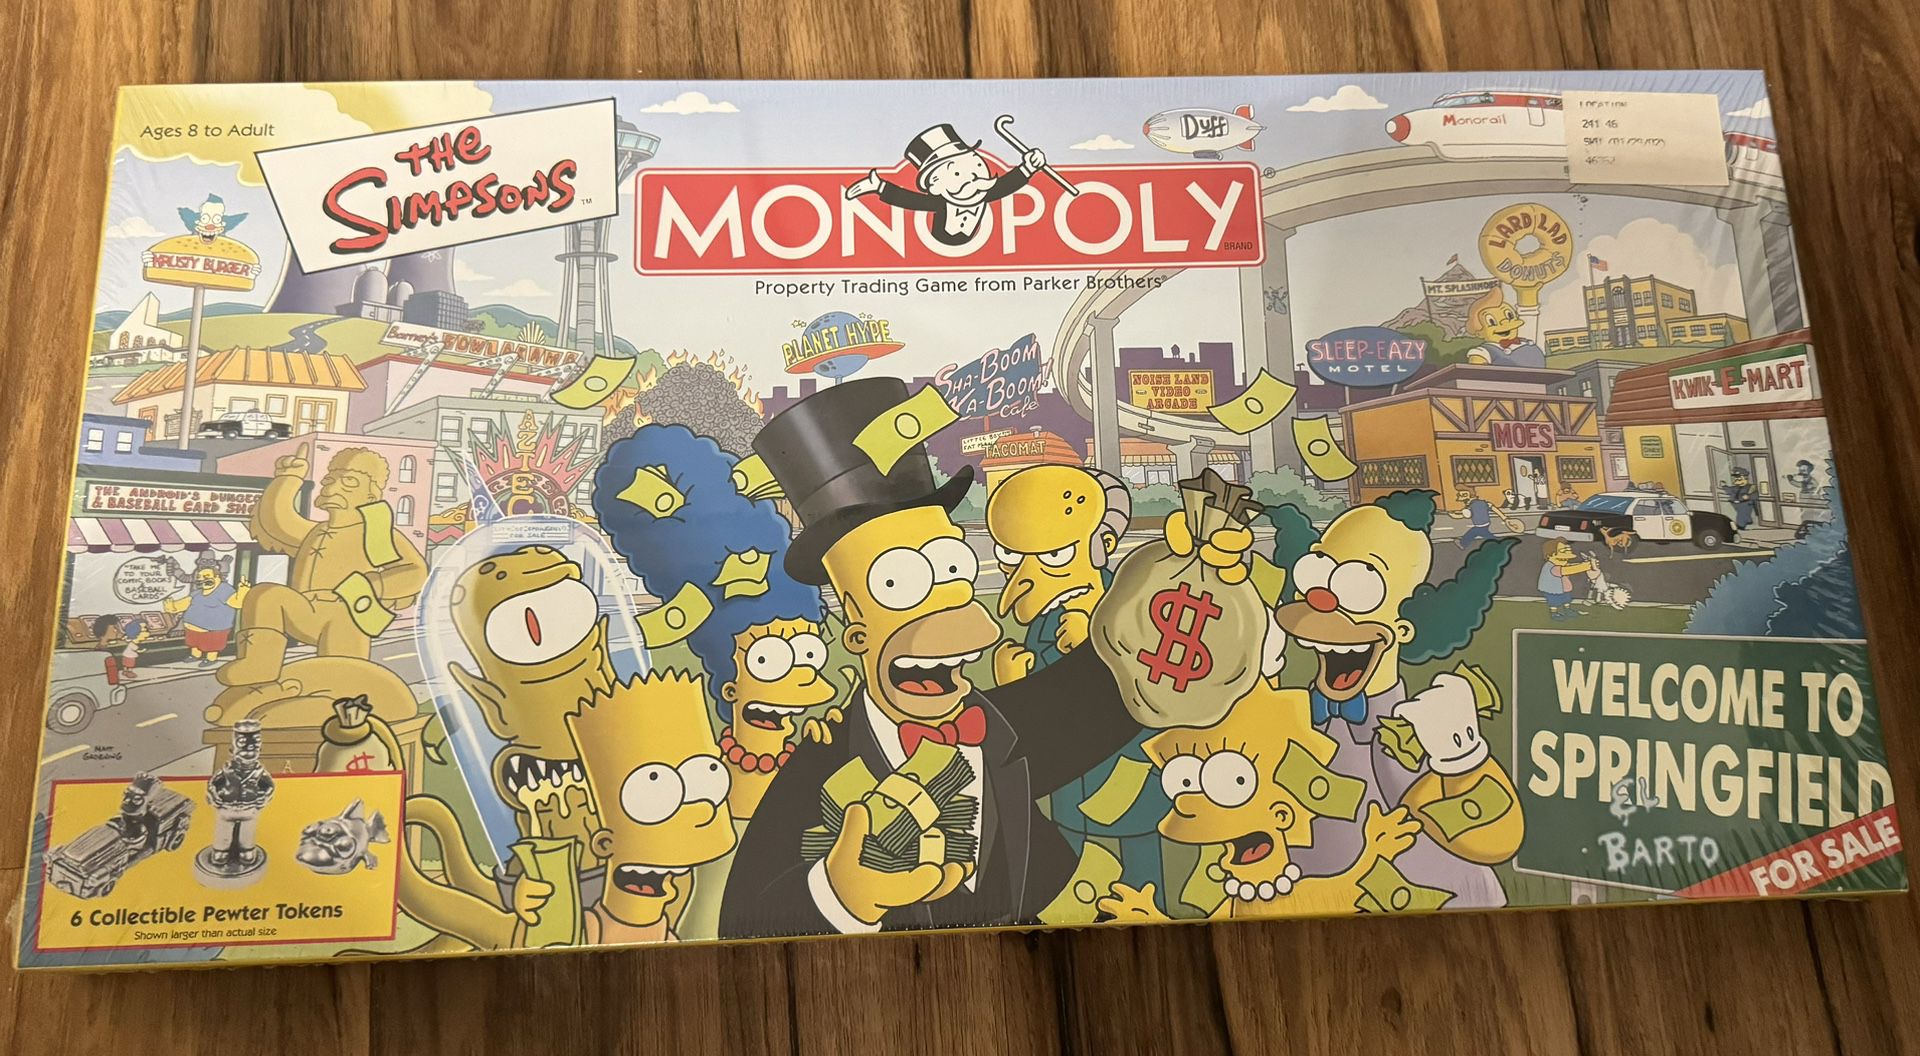 Simpsons Monopoly 2001 With 6 Collectible Pewter Tokens NIB